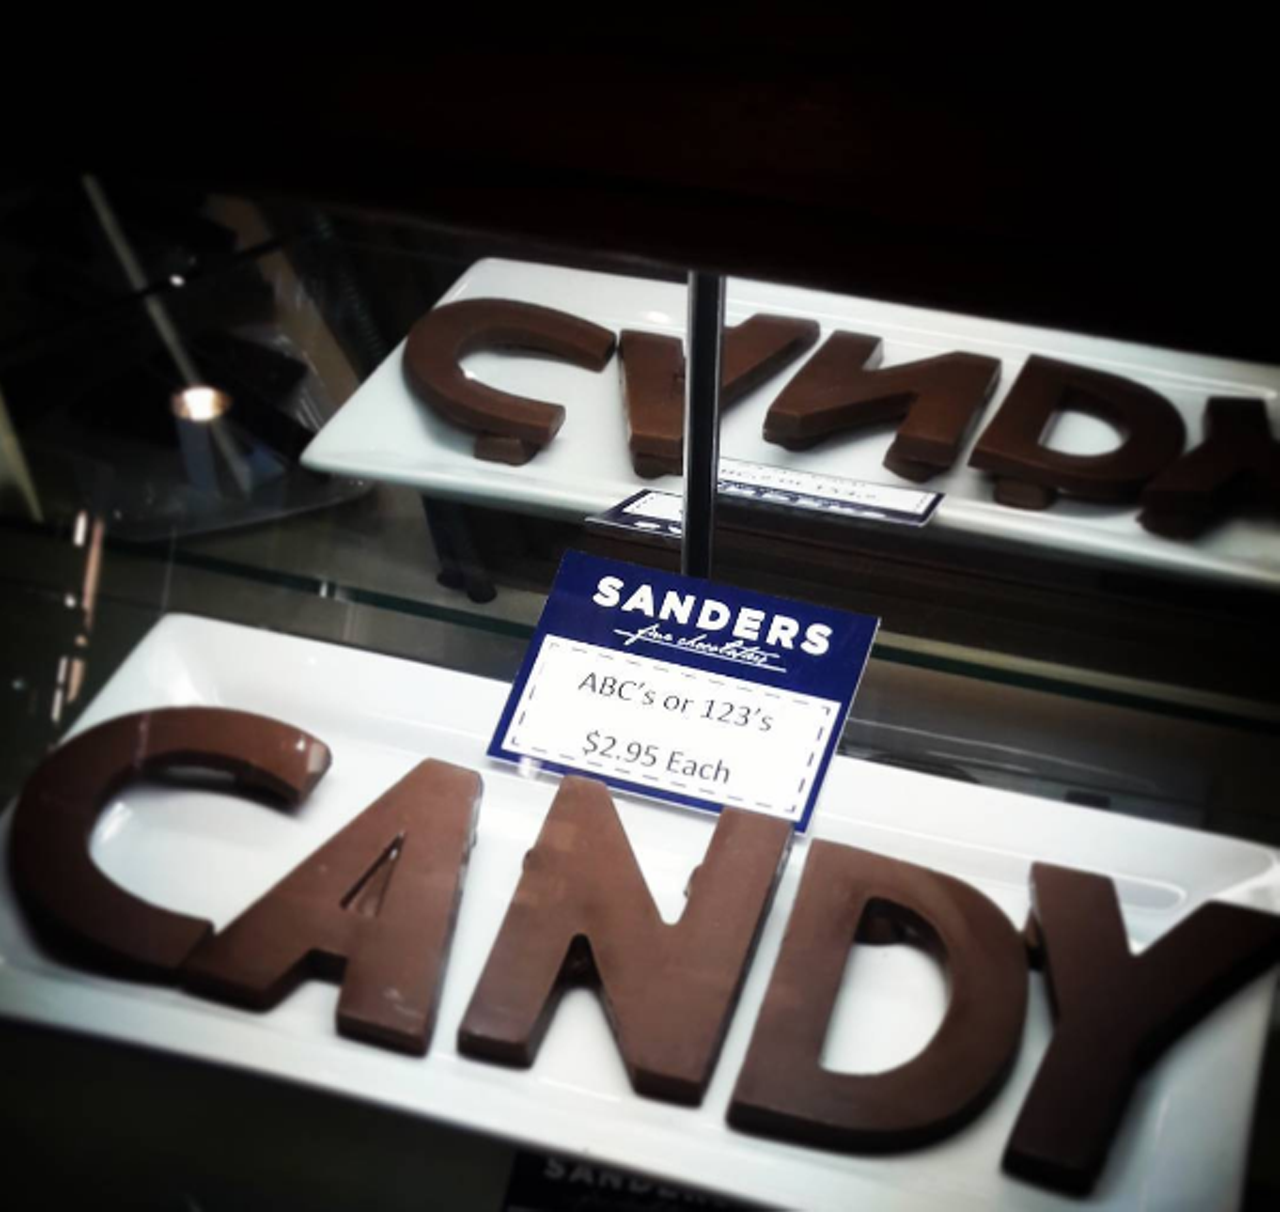 Morley's Candy Factory 
Morley's Candy Factory located at 23770 Hall Rd in Clinton Township offers delicious Sanders chocolate sweets and factory tours. You can see just how these chocolates are made and then purchace your own.
Open Mon.-Sat. 9am-9pm, Sun. 11am-5pm